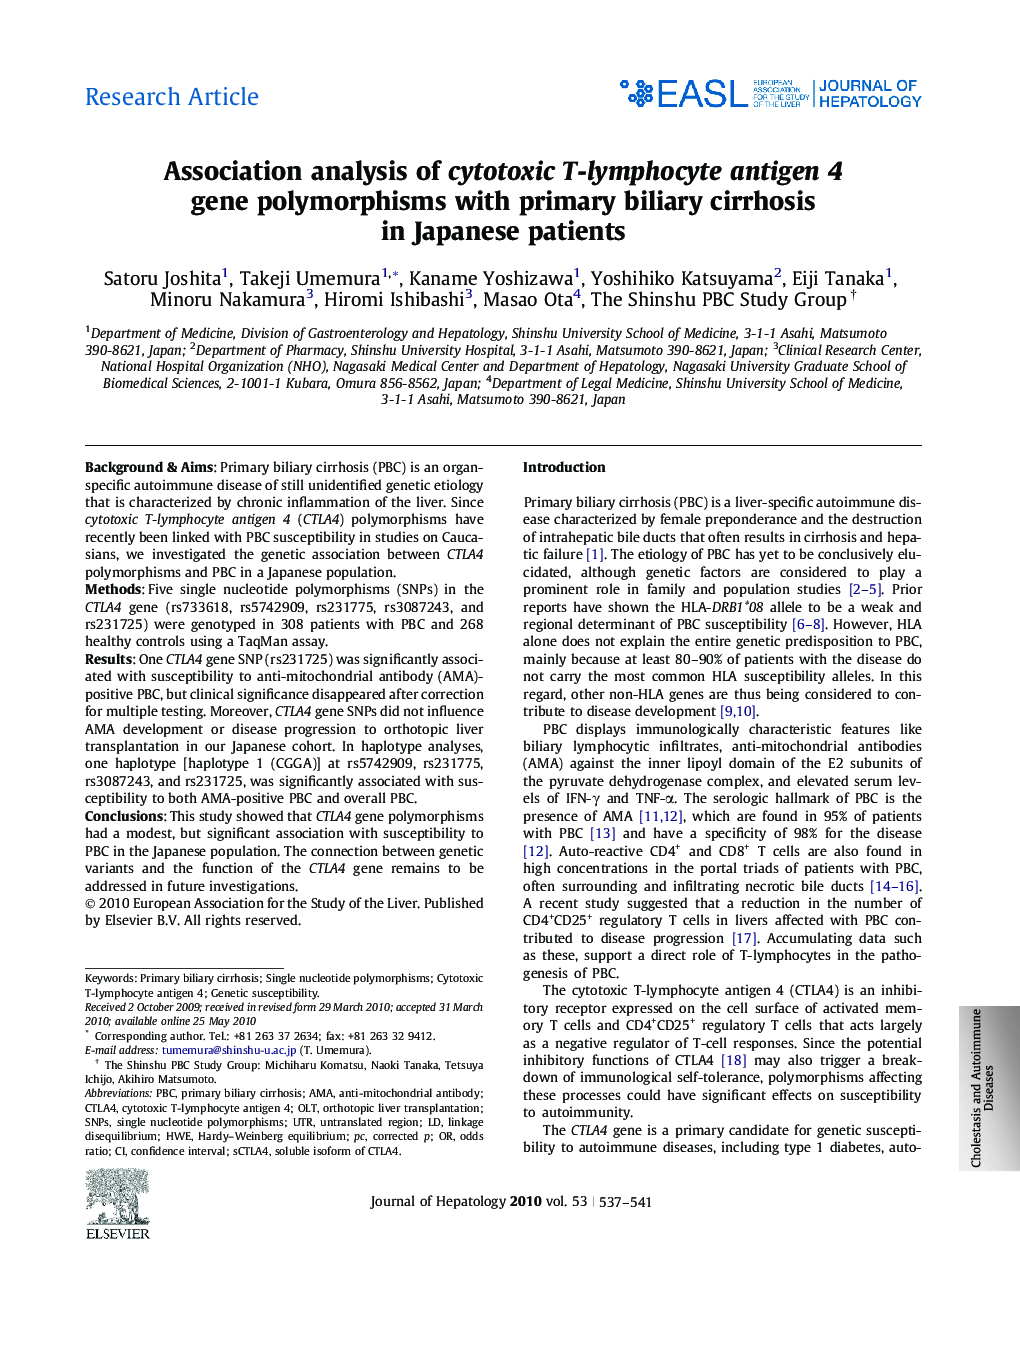 Research ArticleAssociation analysis of cytotoxic T-lymphocyte antigen 4 gene polymorphisms with primary biliary cirrhosis in Japanese patients